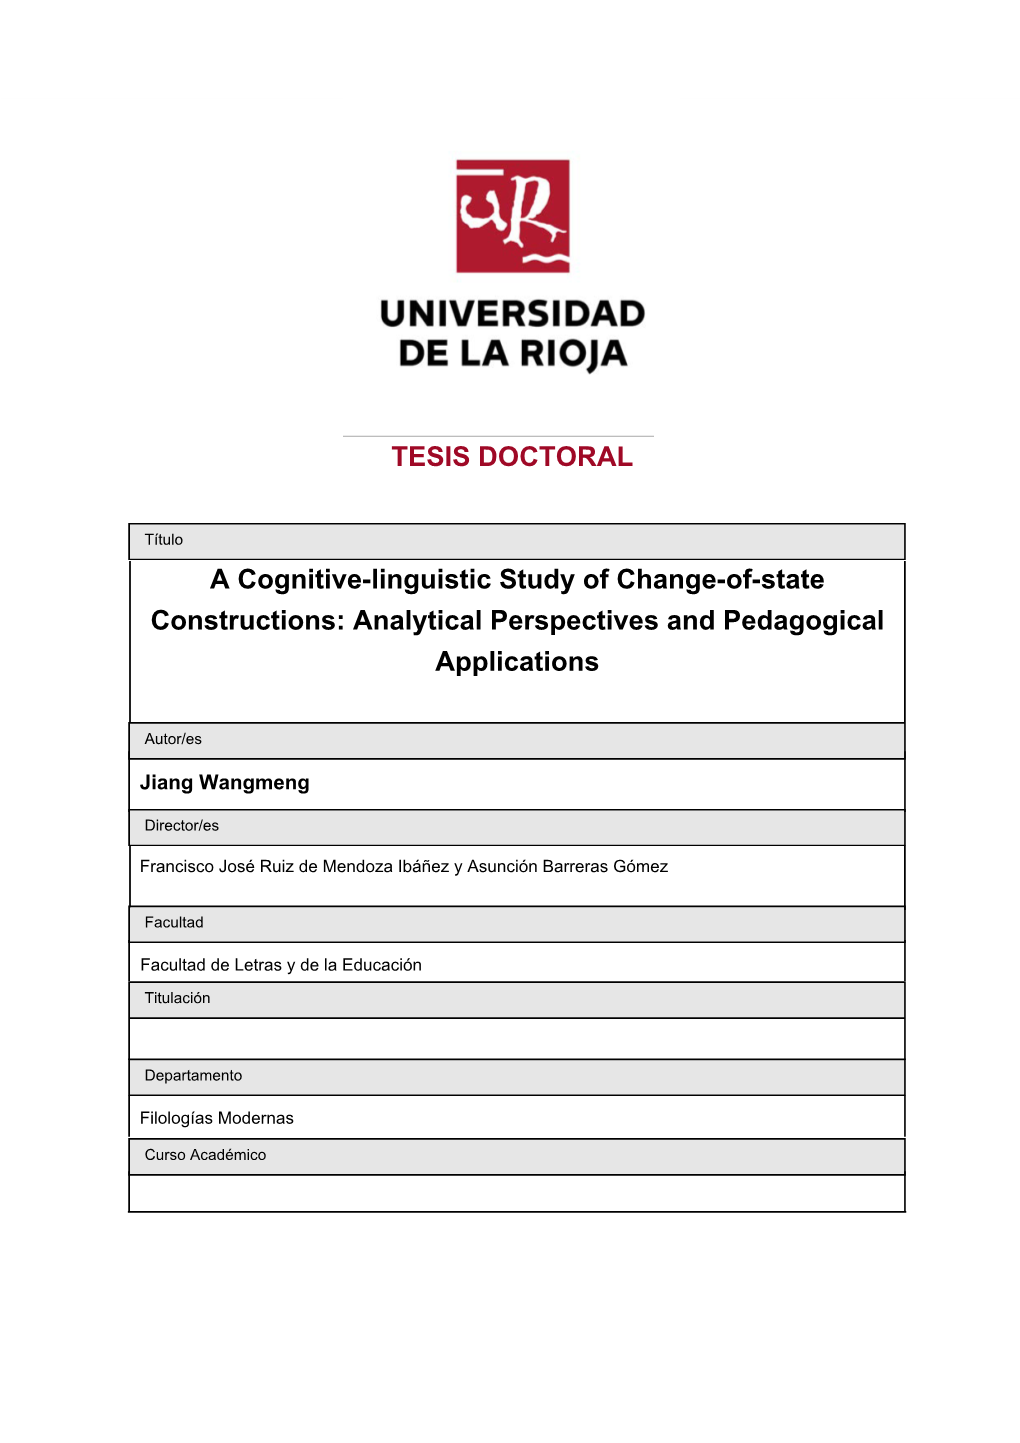 A Cognitive-Linguistic Study of Change-Of-State Constructions: Analytical Perspectives and Pedagogical Applications